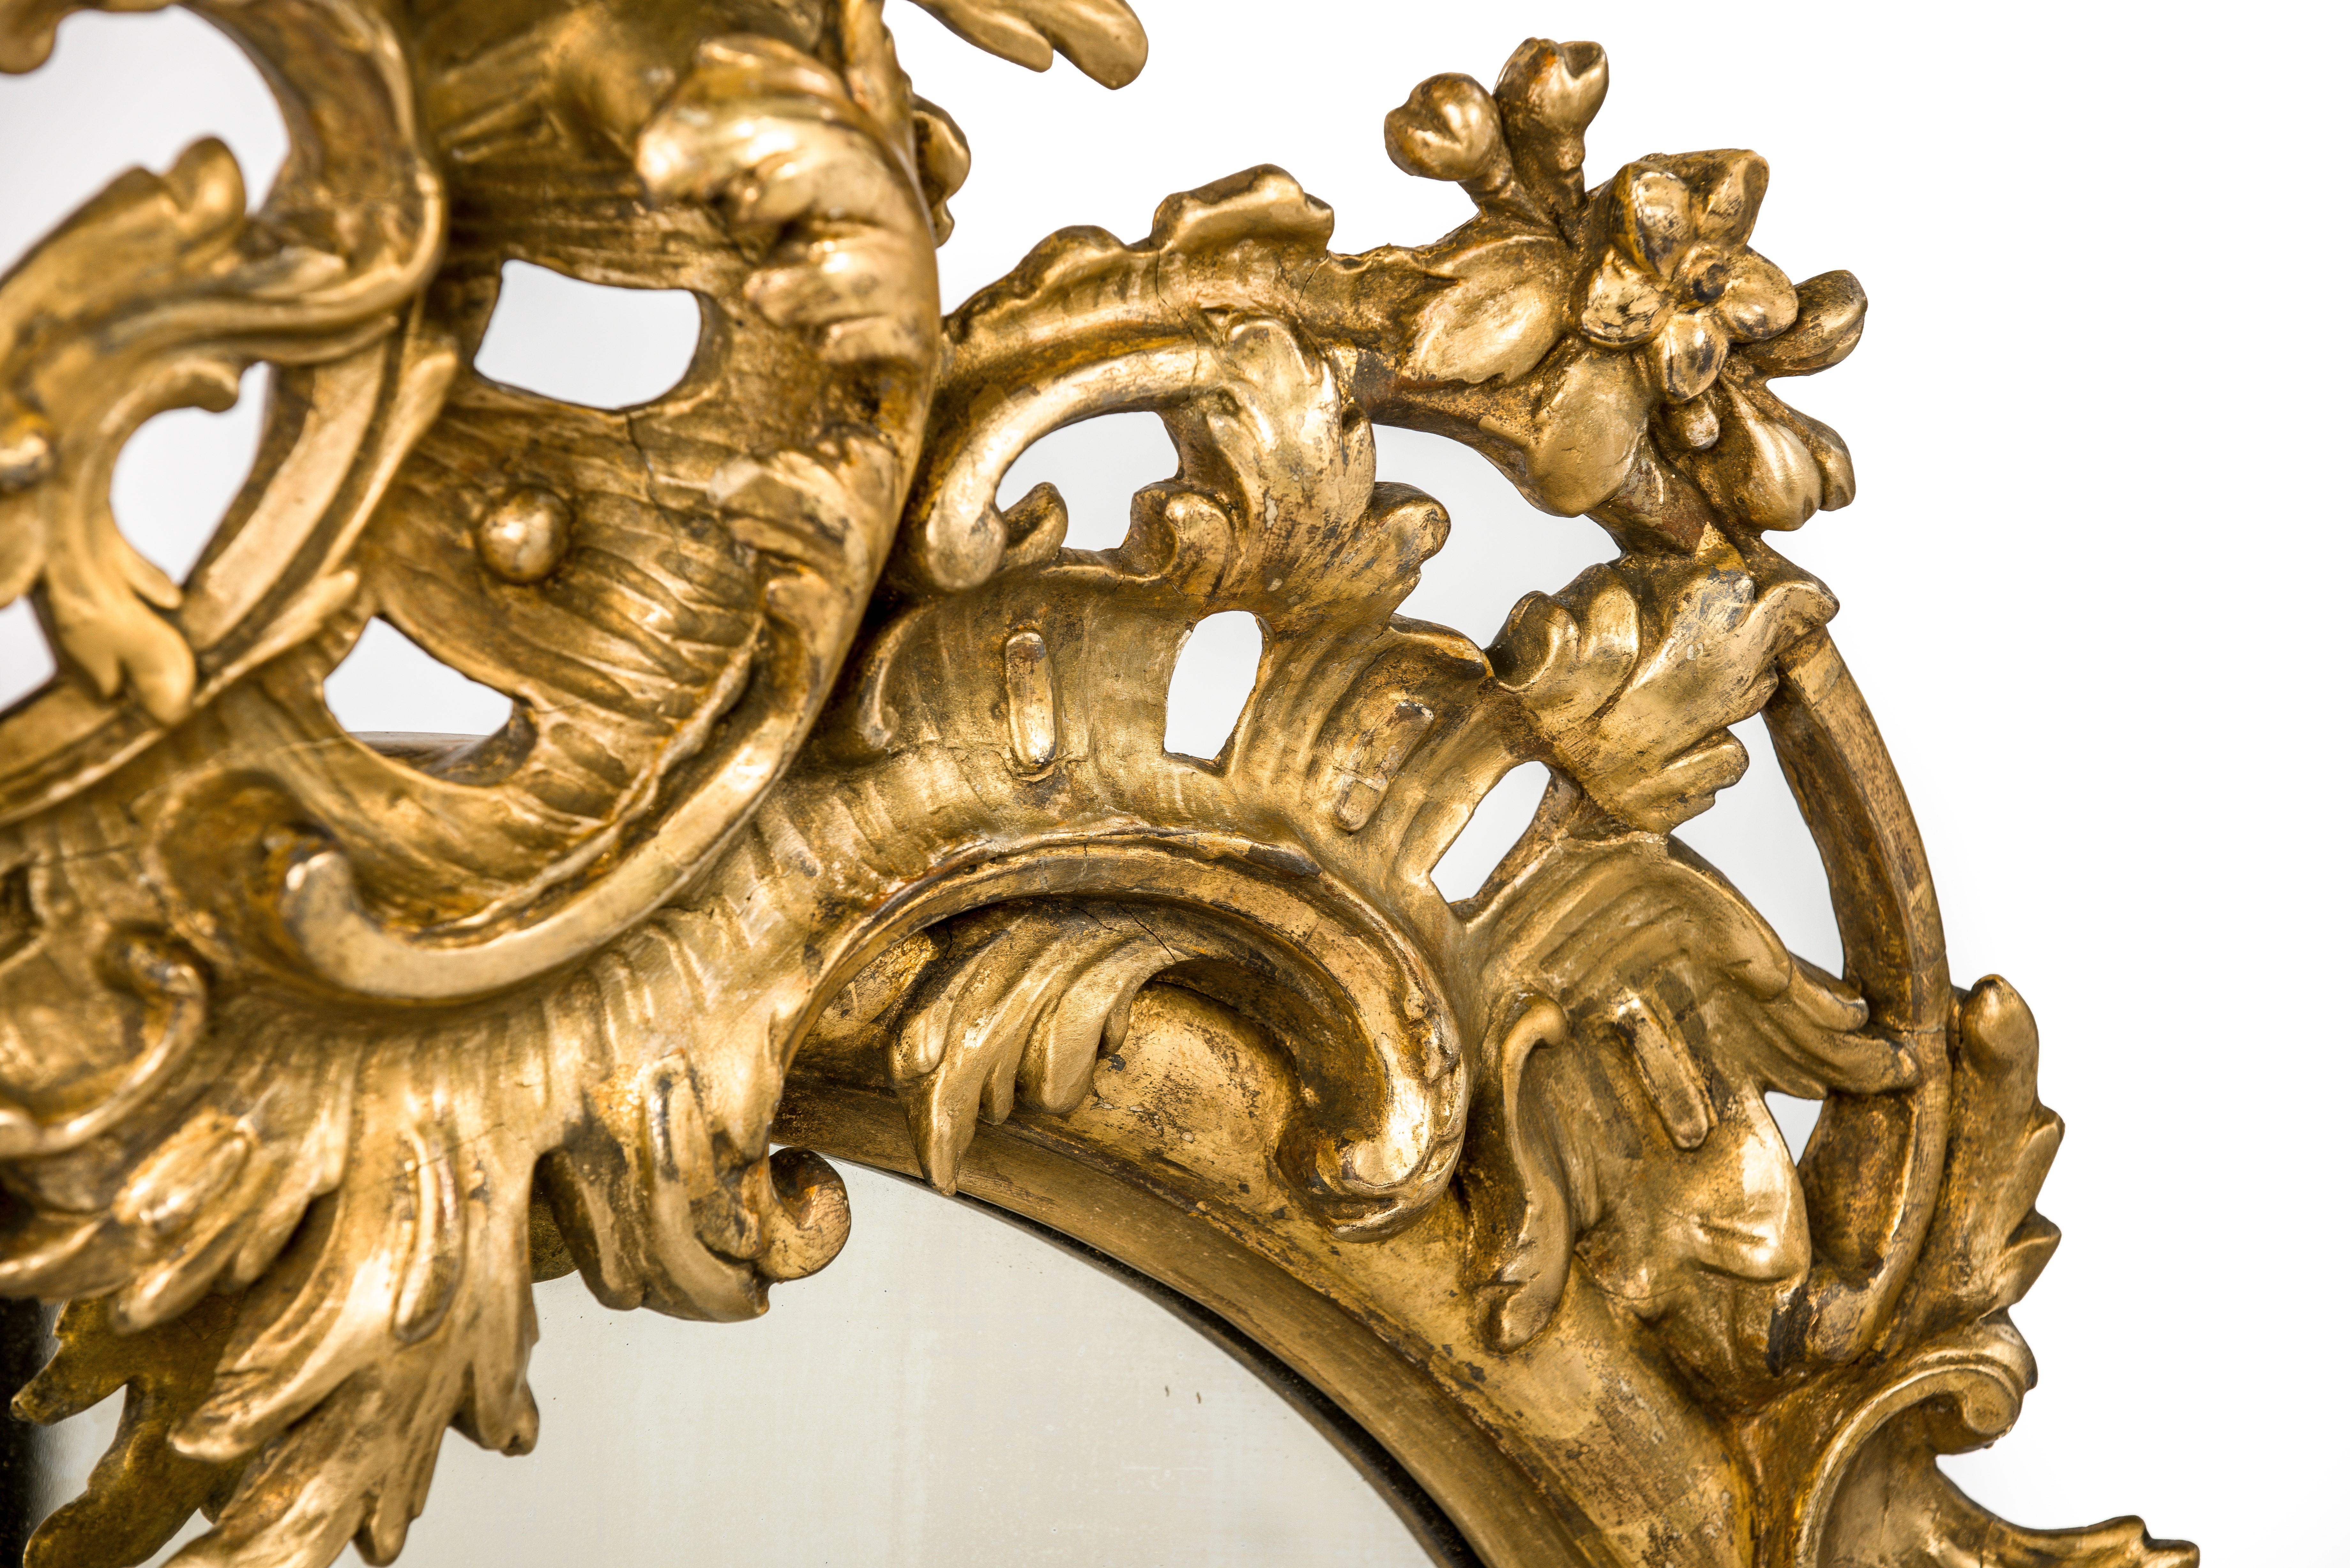 Carved Antique 19th Century French Gold Rococo Wall Mirror with Cherubs or Putti